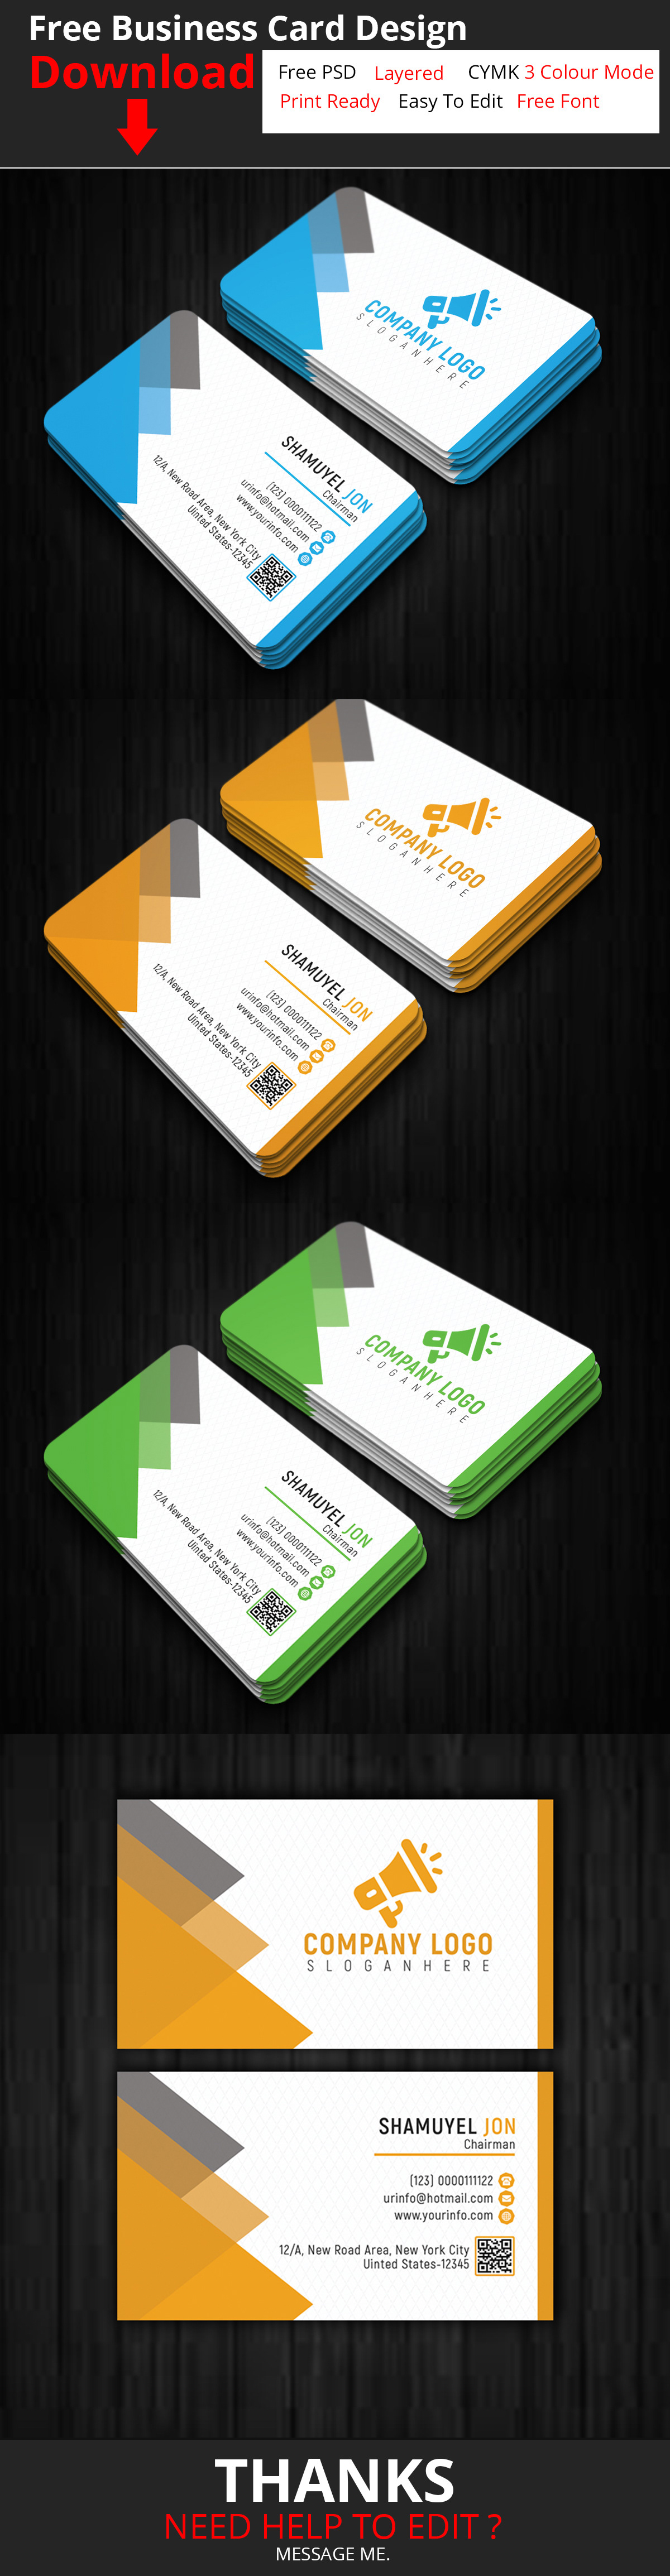 psd free business card corporate business card mockup business Business card template professional clean